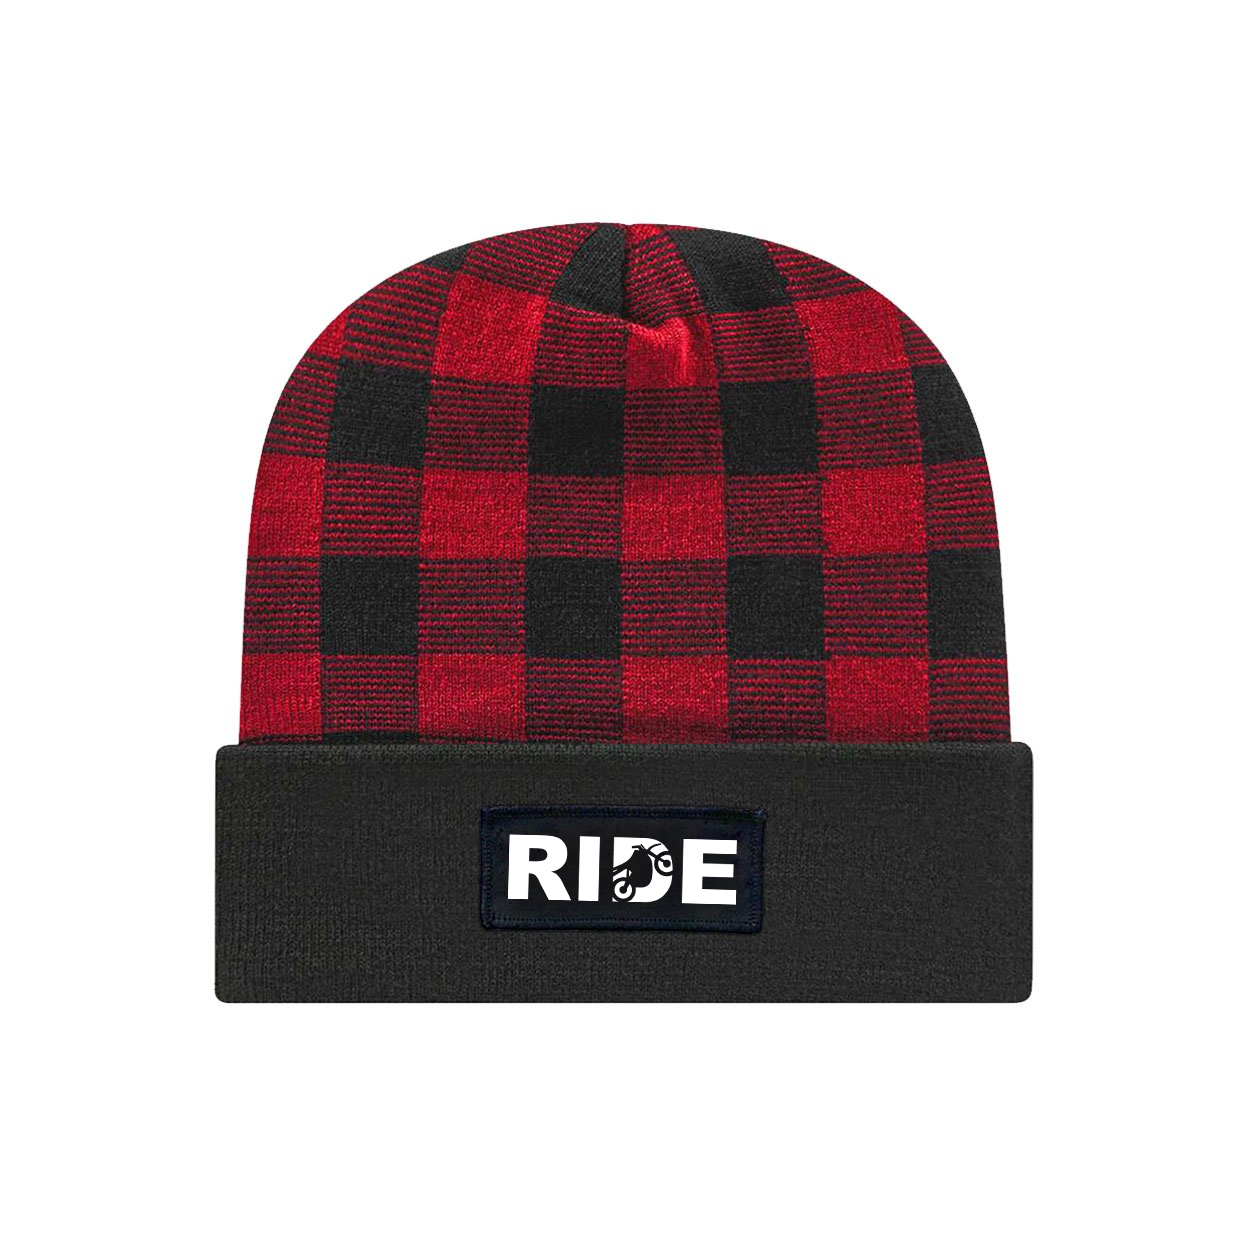 Ride Moto Logo Night Out Woven Patch Roll Up Plaid Beanie Black/True Red (White Logo)